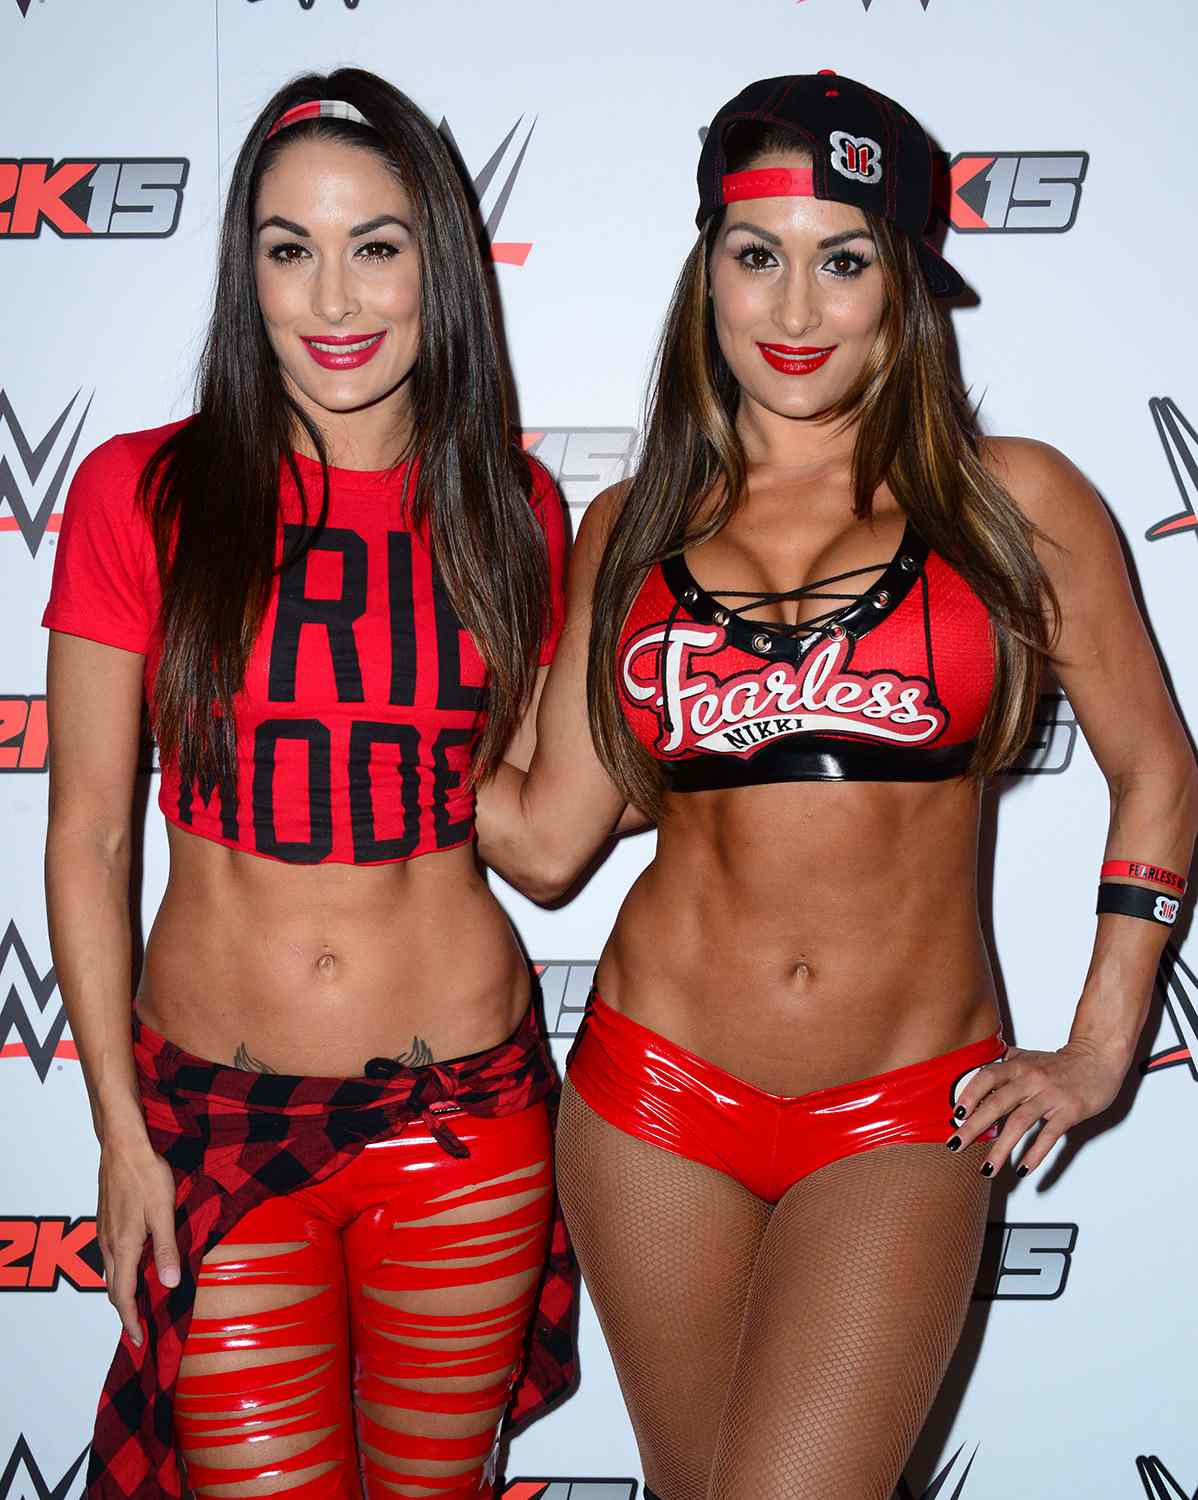 Nikki and Brie Bella to Be Inducted Into WWE Hall of Fame PEOPLE.com.